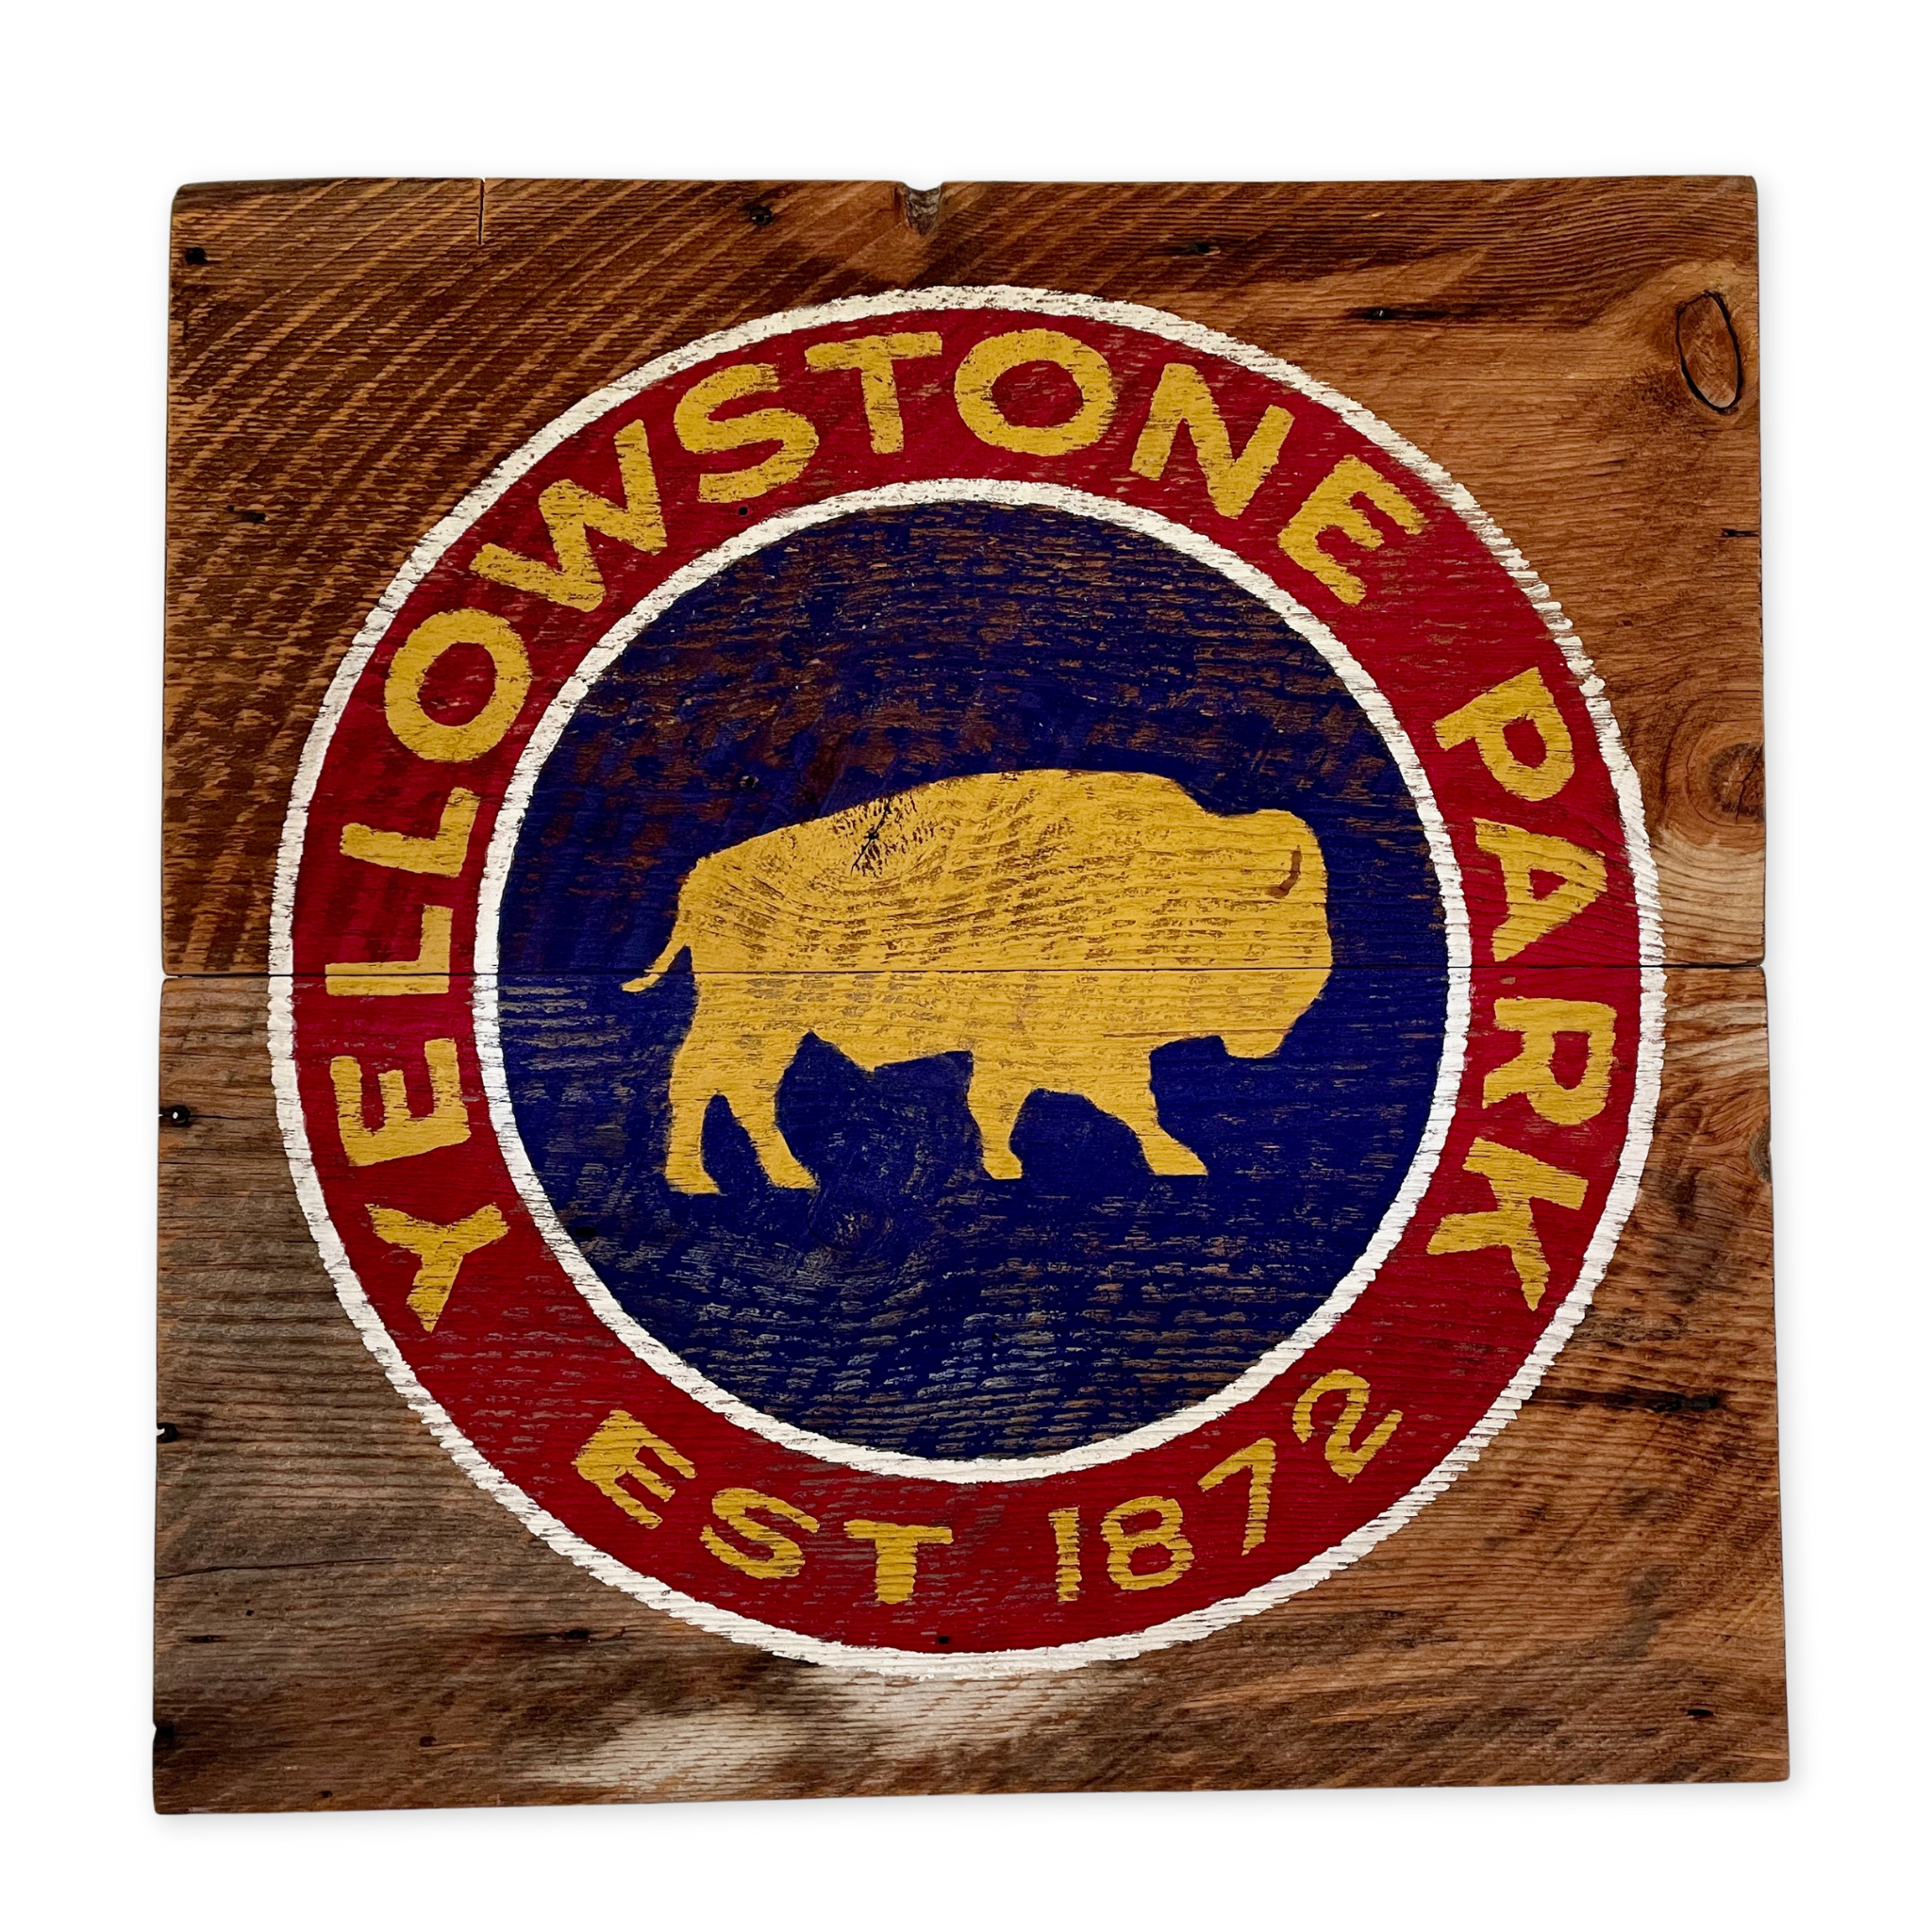 rustic wooden sign with an image of a bison and the words yellowstone park printed on it